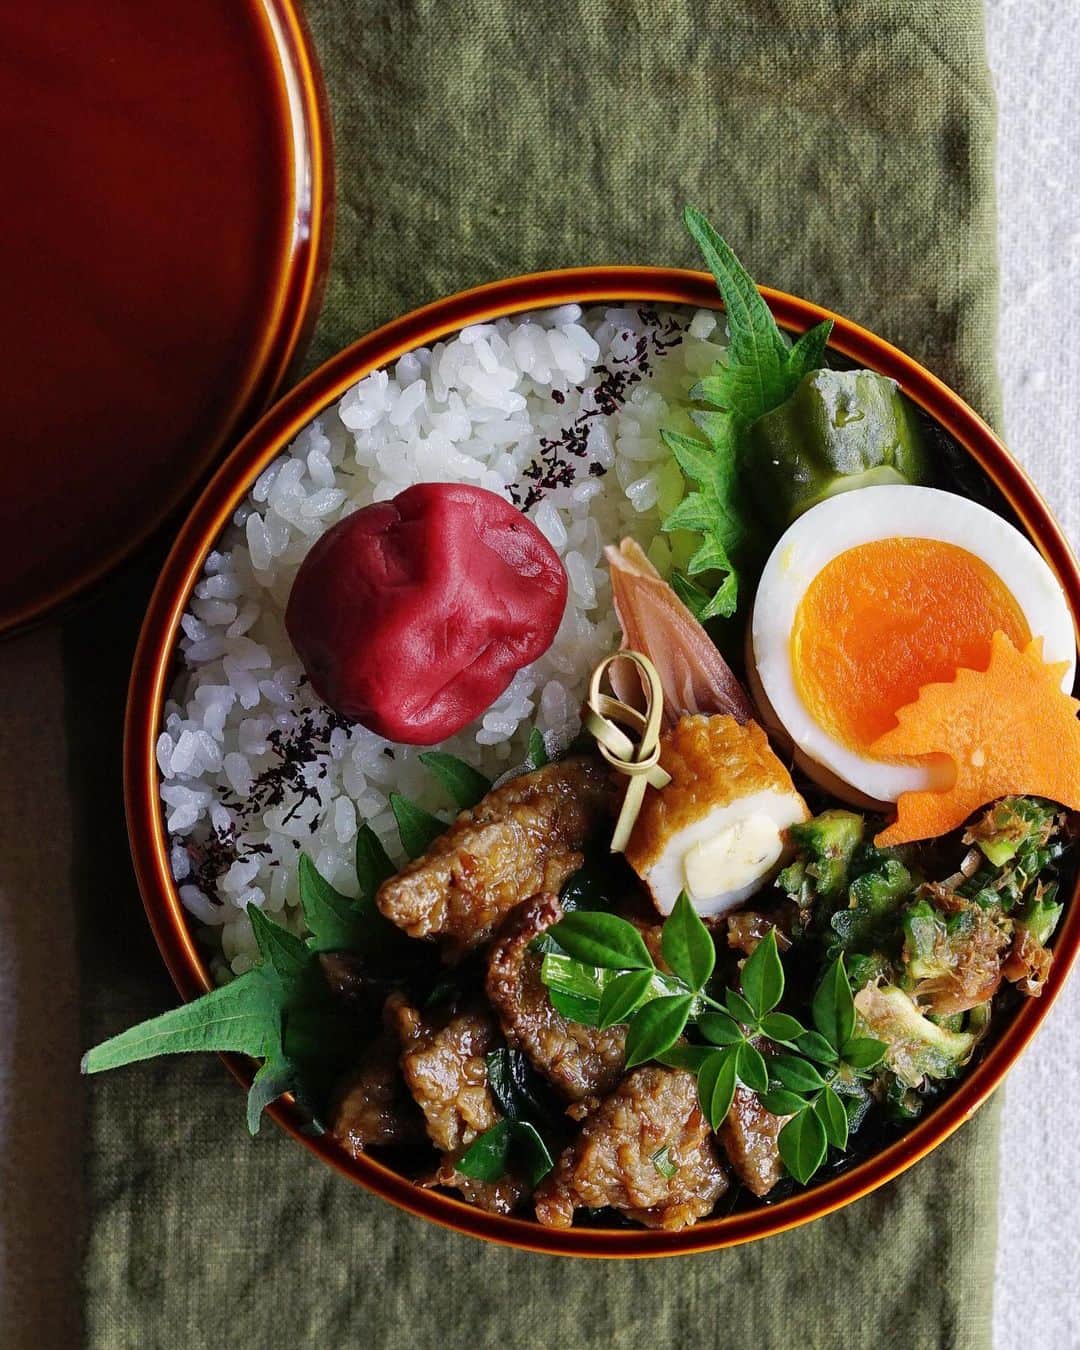 Ryoko Yunokiのインスタグラム：「+ + + Stir-fried liver and Chinese chives bento/レバニラ炒め弁当 . *rice and umeboshi *stir-fried liver and chinese chives *hard-boiled egg *bitter gourd salad with bonito flakes *chikuwa and cheese *pickled myoga and cucumber . ＊ご飯と梅干し ＊レバニラ炒め ＊ゆで卵 ＊ゴーヤサラダ ＊竹輪チーズ ＊茗荷の甘酢漬け ＊胡瓜の糠漬け + + + #bento #お弁当 #丸の内弁当 #f52grams #曲げわっぱ #春慶塗 #飛騨春慶」